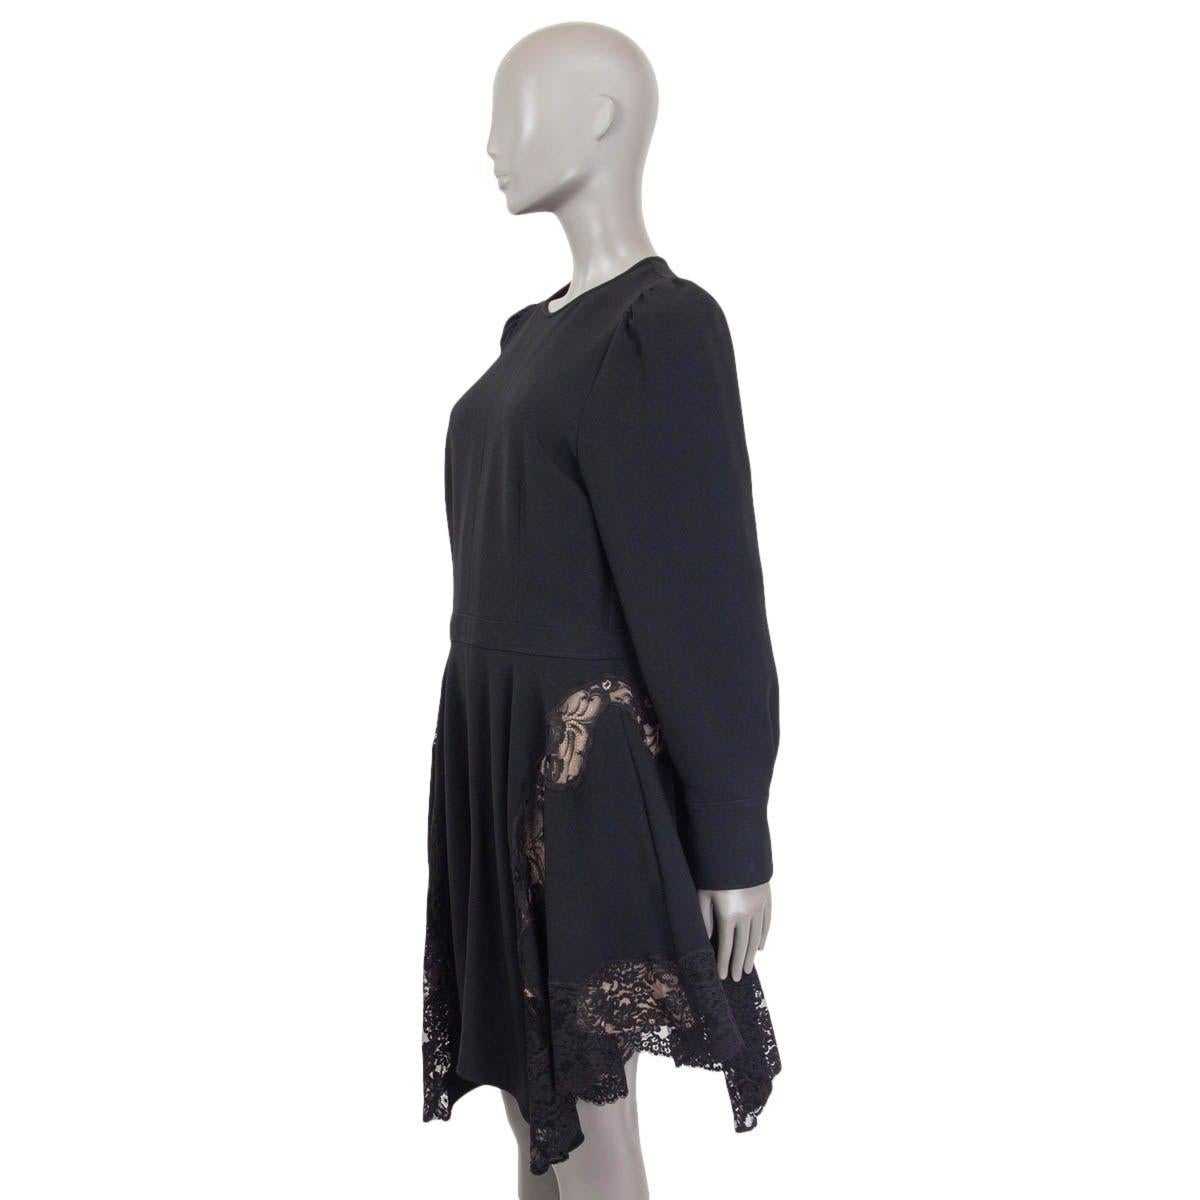 100% authentic Stella McCartney long sleeve dress in black viscose (49%), acetate (48%) and elastane (3%). Features a lace trim, slit pockets and buttoned cuffs. Opens with a zipper and a hook at the back. Lined in nude silk (100%). The buttons at